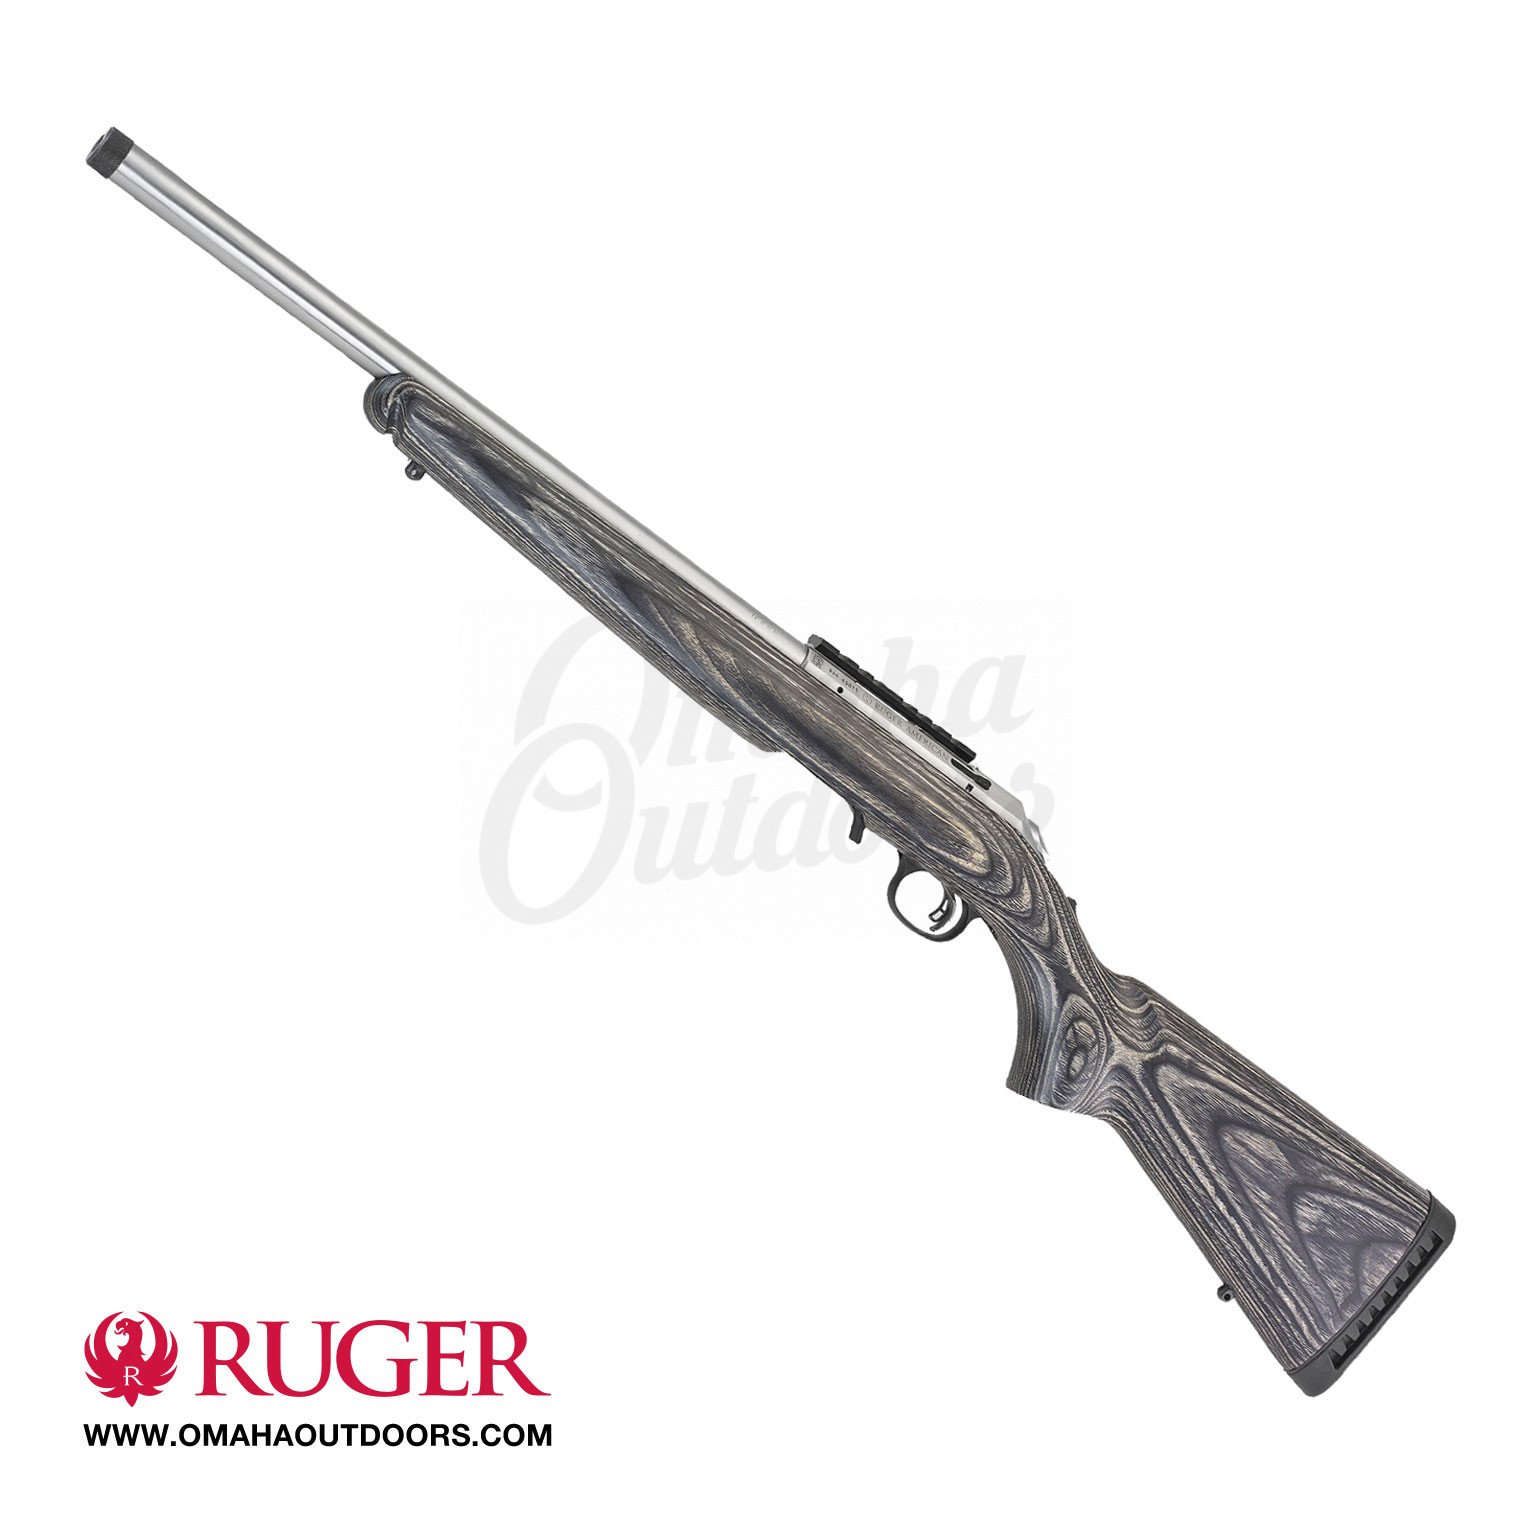 Ruger American Rimfire Target Stainless Bolt Rifle 22 Wmr 9 Rd 18 1228 Threaded 8368